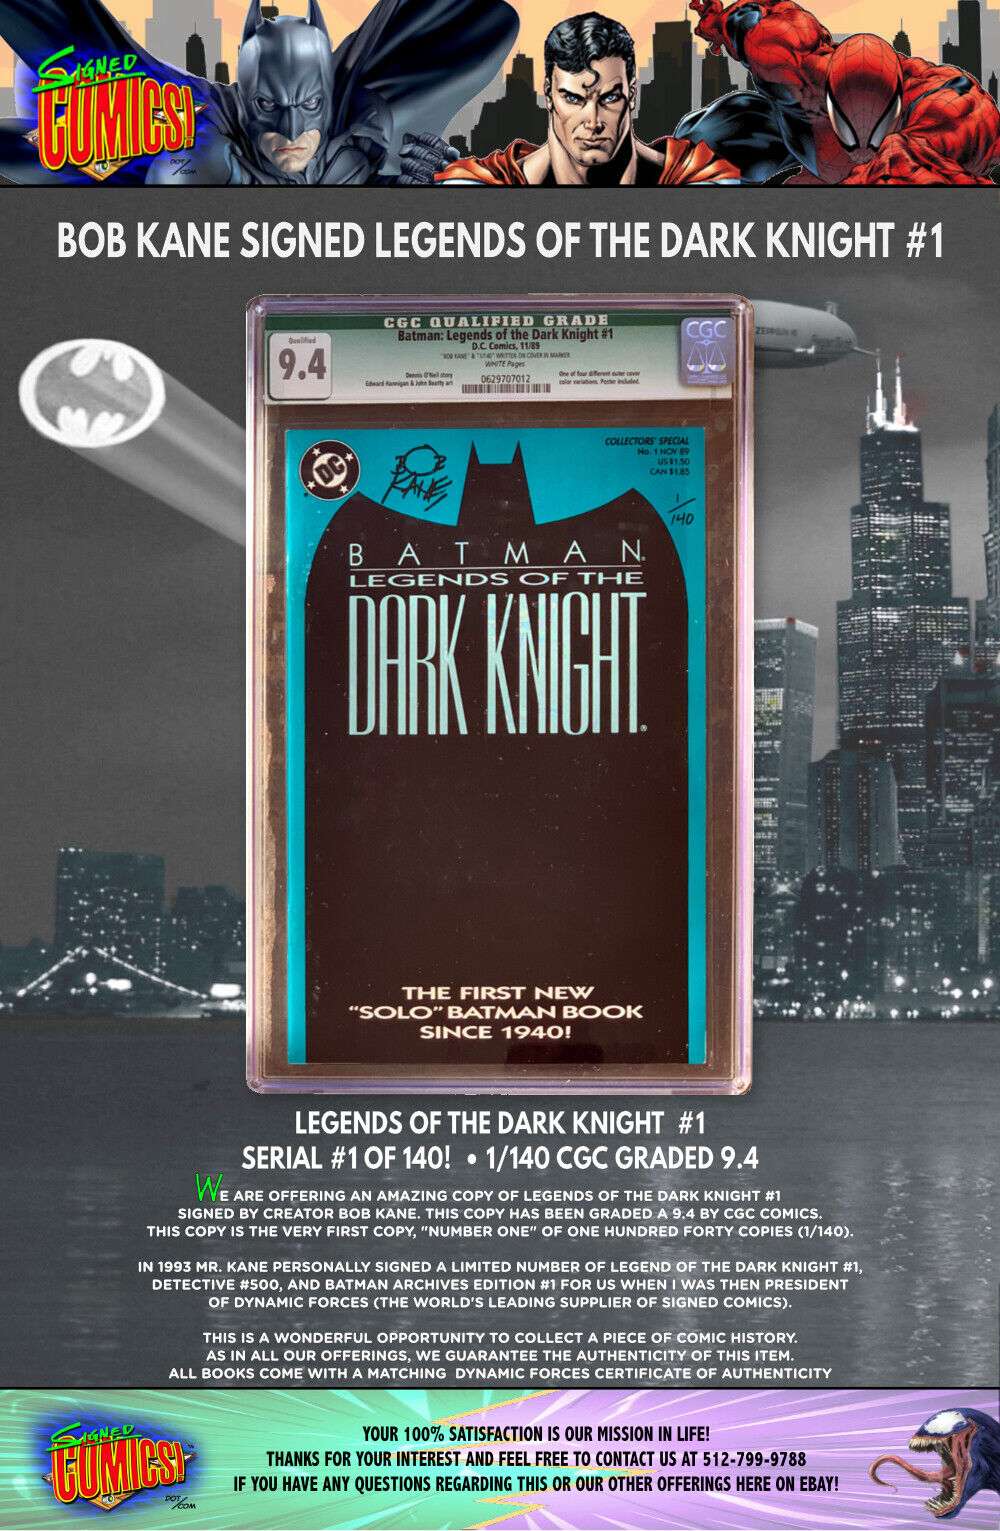 BOB KANE SIGNED LEGENDS OF THE DARK KNIGHT #1 • CGC GRADED 9.4 1/140 FIRST COPY